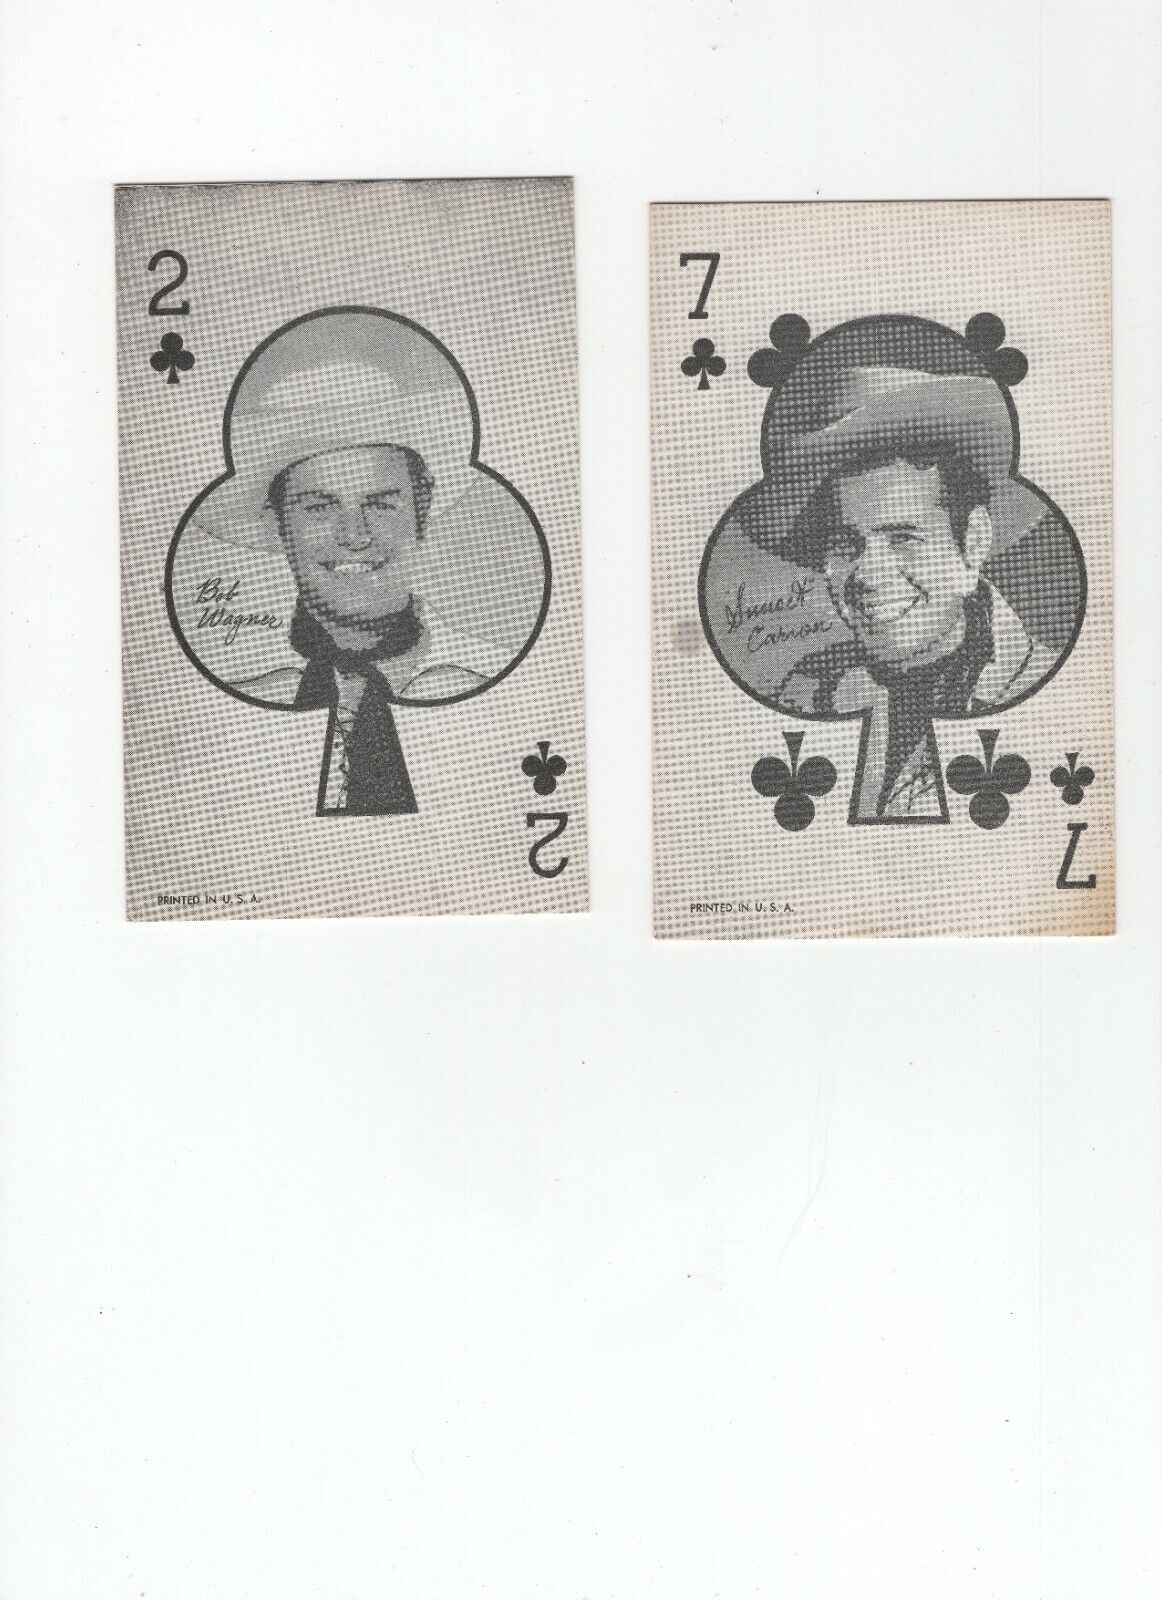 Western Aces Exhibit Arcade cards.  2 different cards